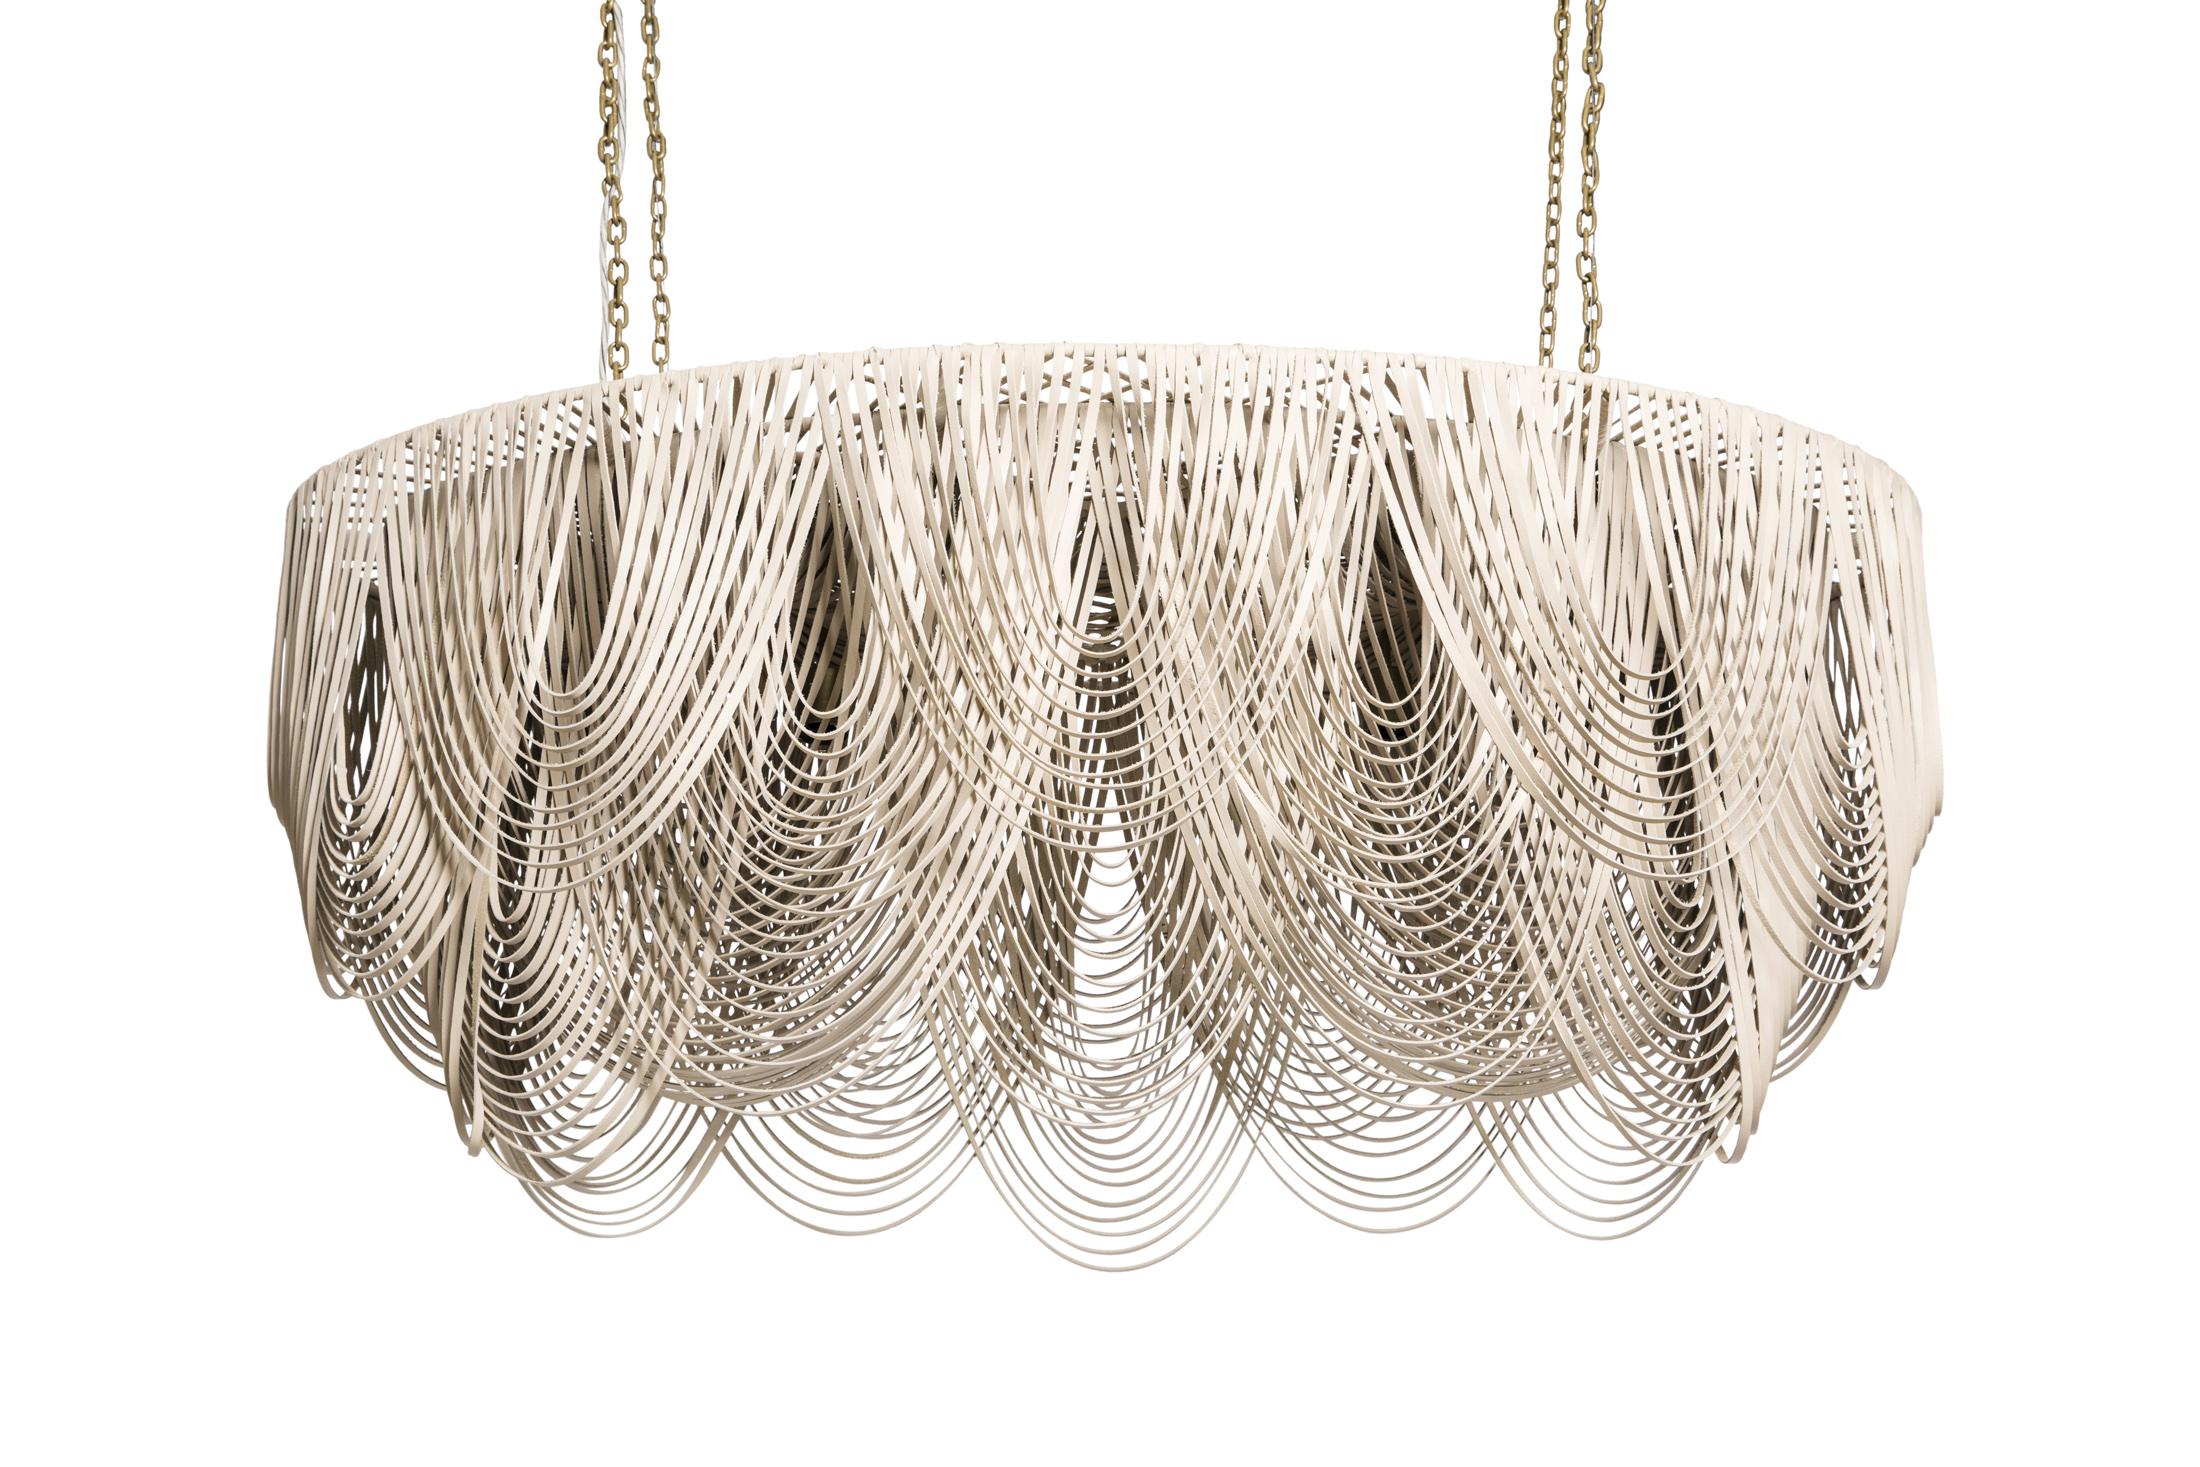 Medium Oval Whisper Leather Chandelier in Cream-Stone Leather